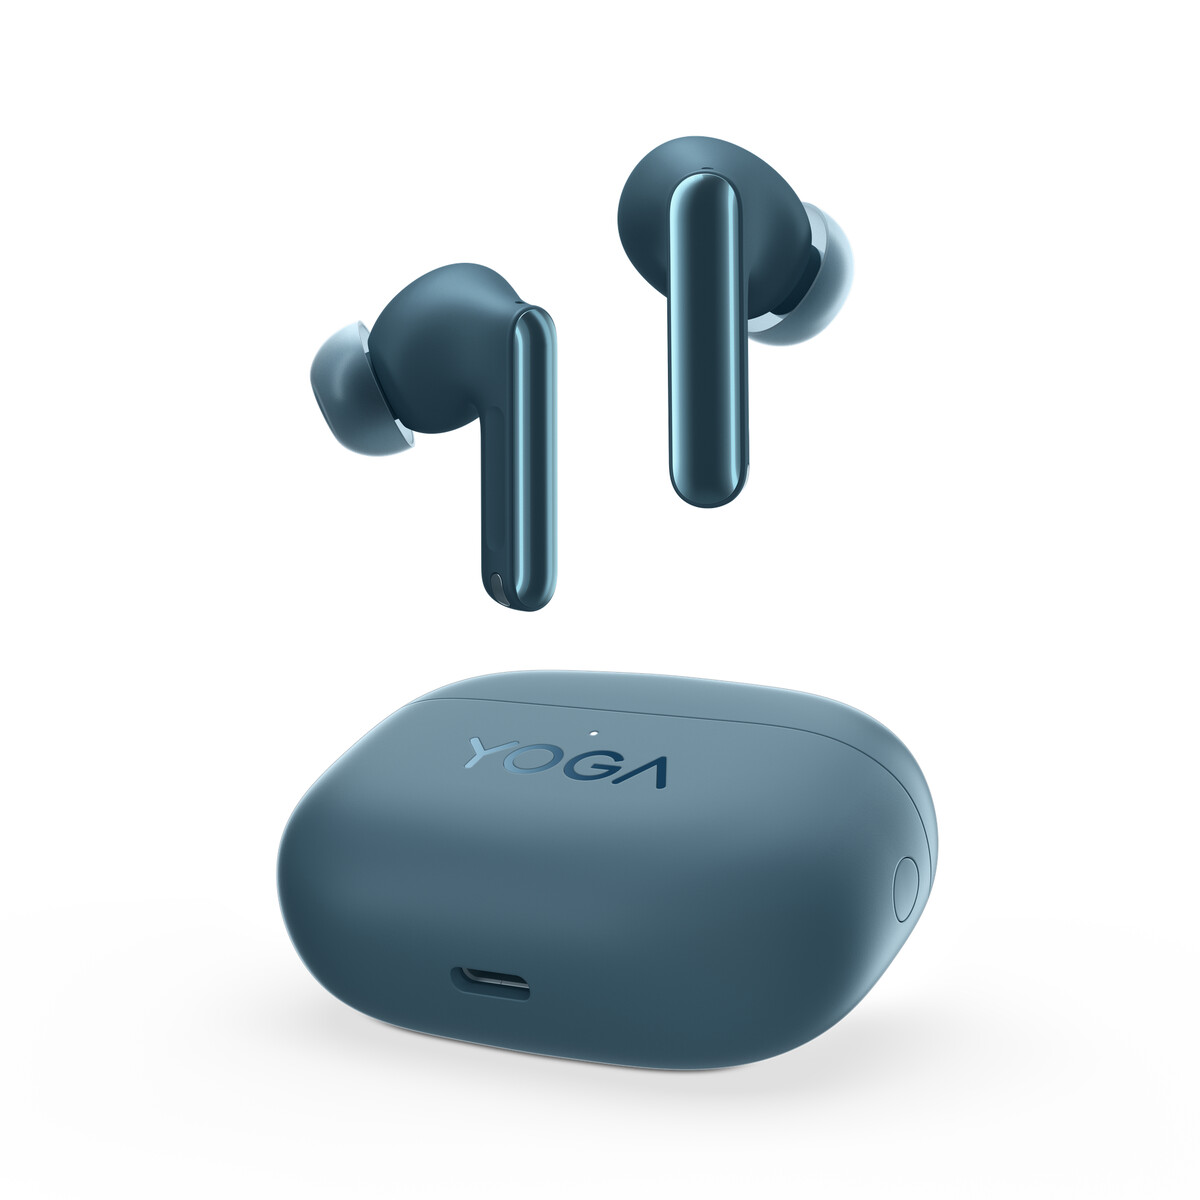 Lenovo Yoga True Wireless Stereo Earbuds debut as new Yoga PC